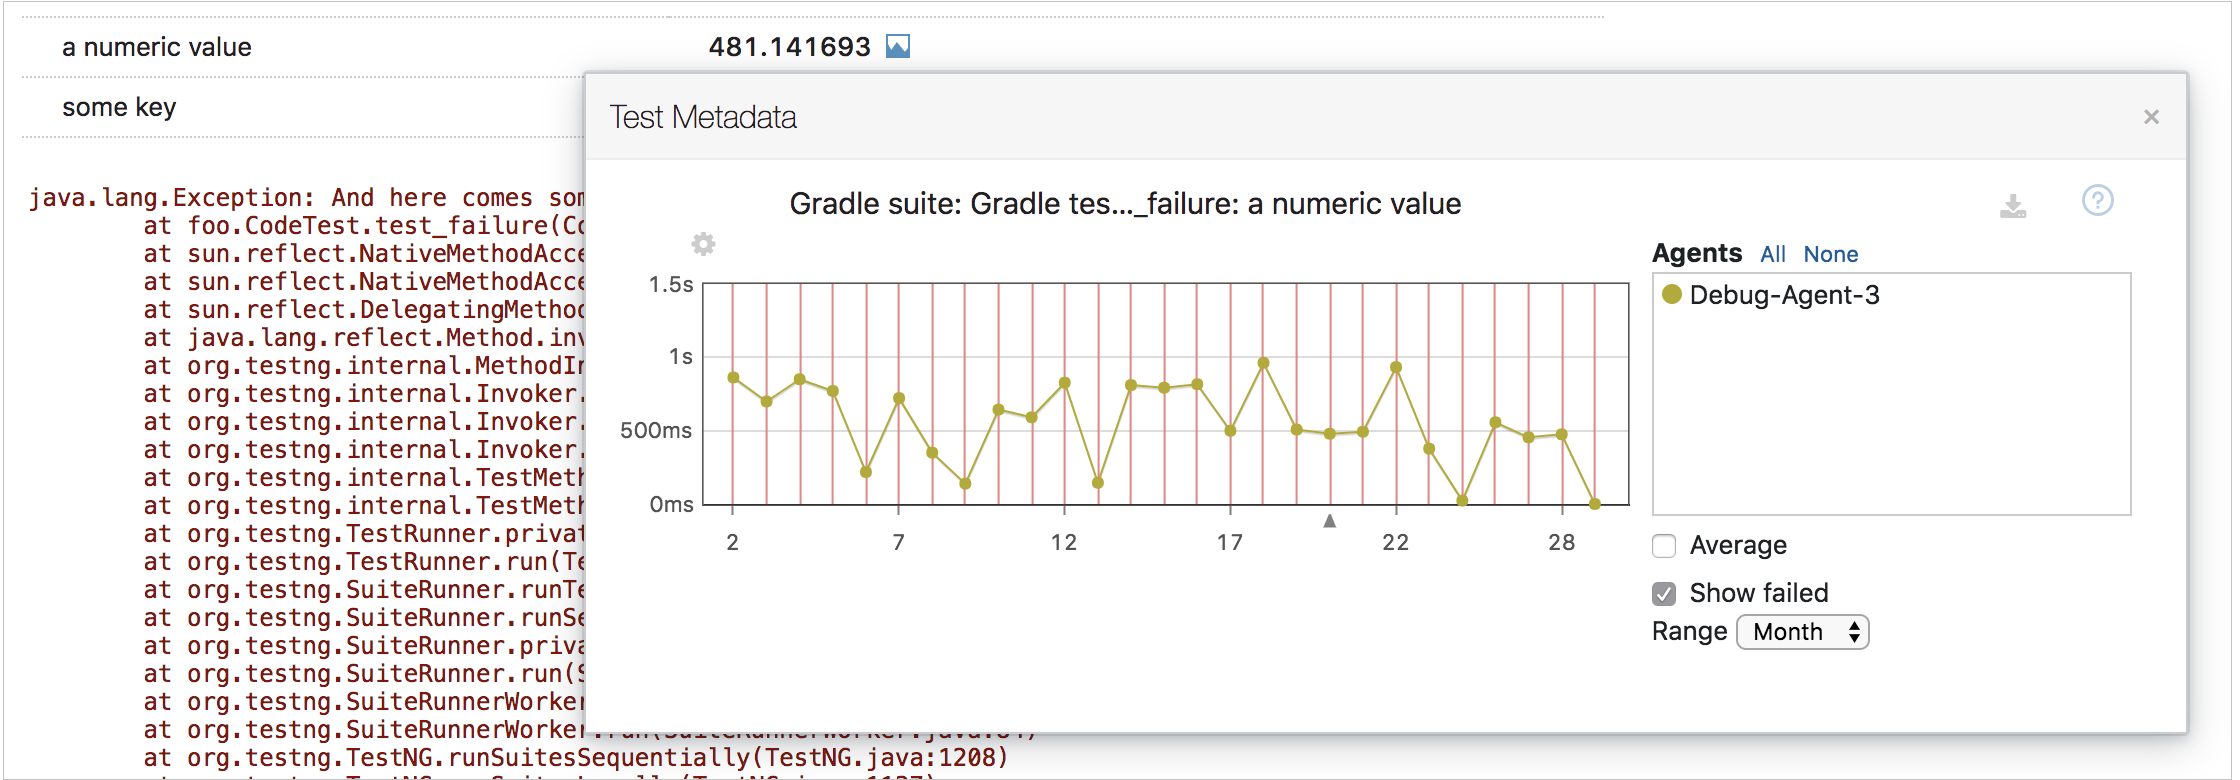 Additional test data graph for numeric values